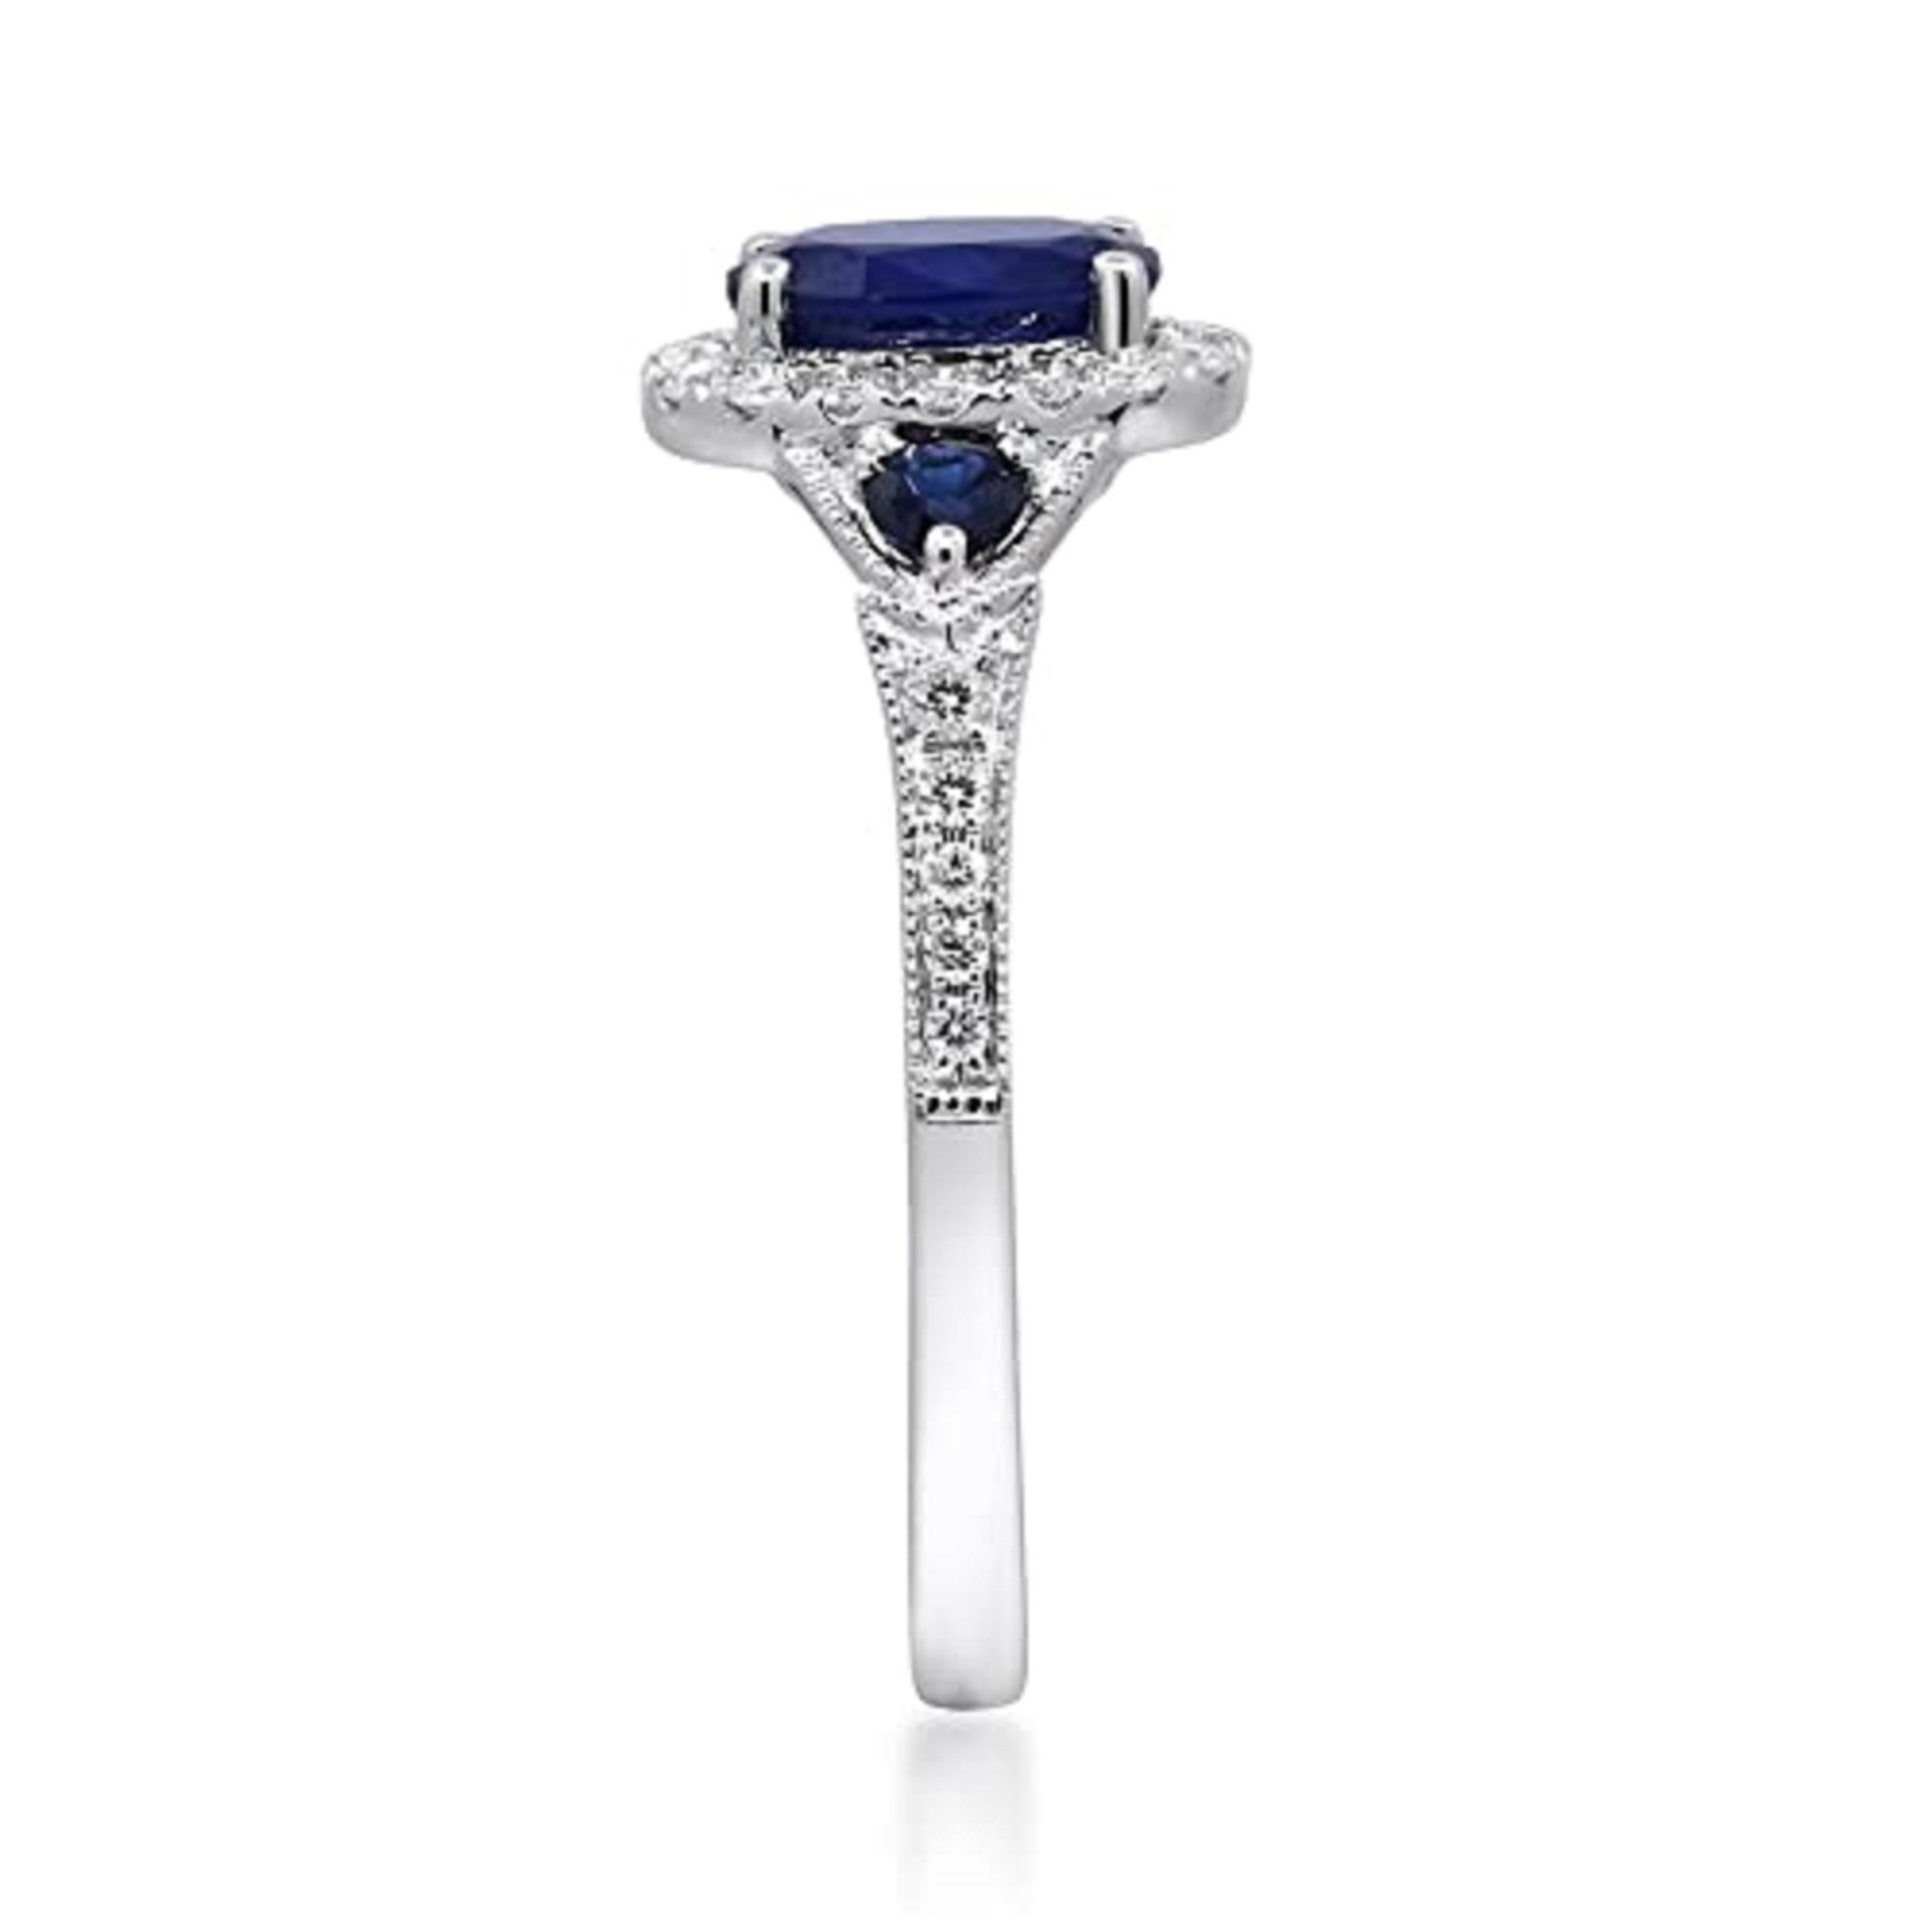 Decorate yourself in elegance with this Ring is crafted from 14-karat White Gold by Gin & Grace. This Ring is made up of 7x5 mm Oval-Cut Blue Sapphire (1 pcs) 0.94 carat, Round-cut Blue Sapphire (2 pcs) 0.17 carat and Round-cut White Diamond (26